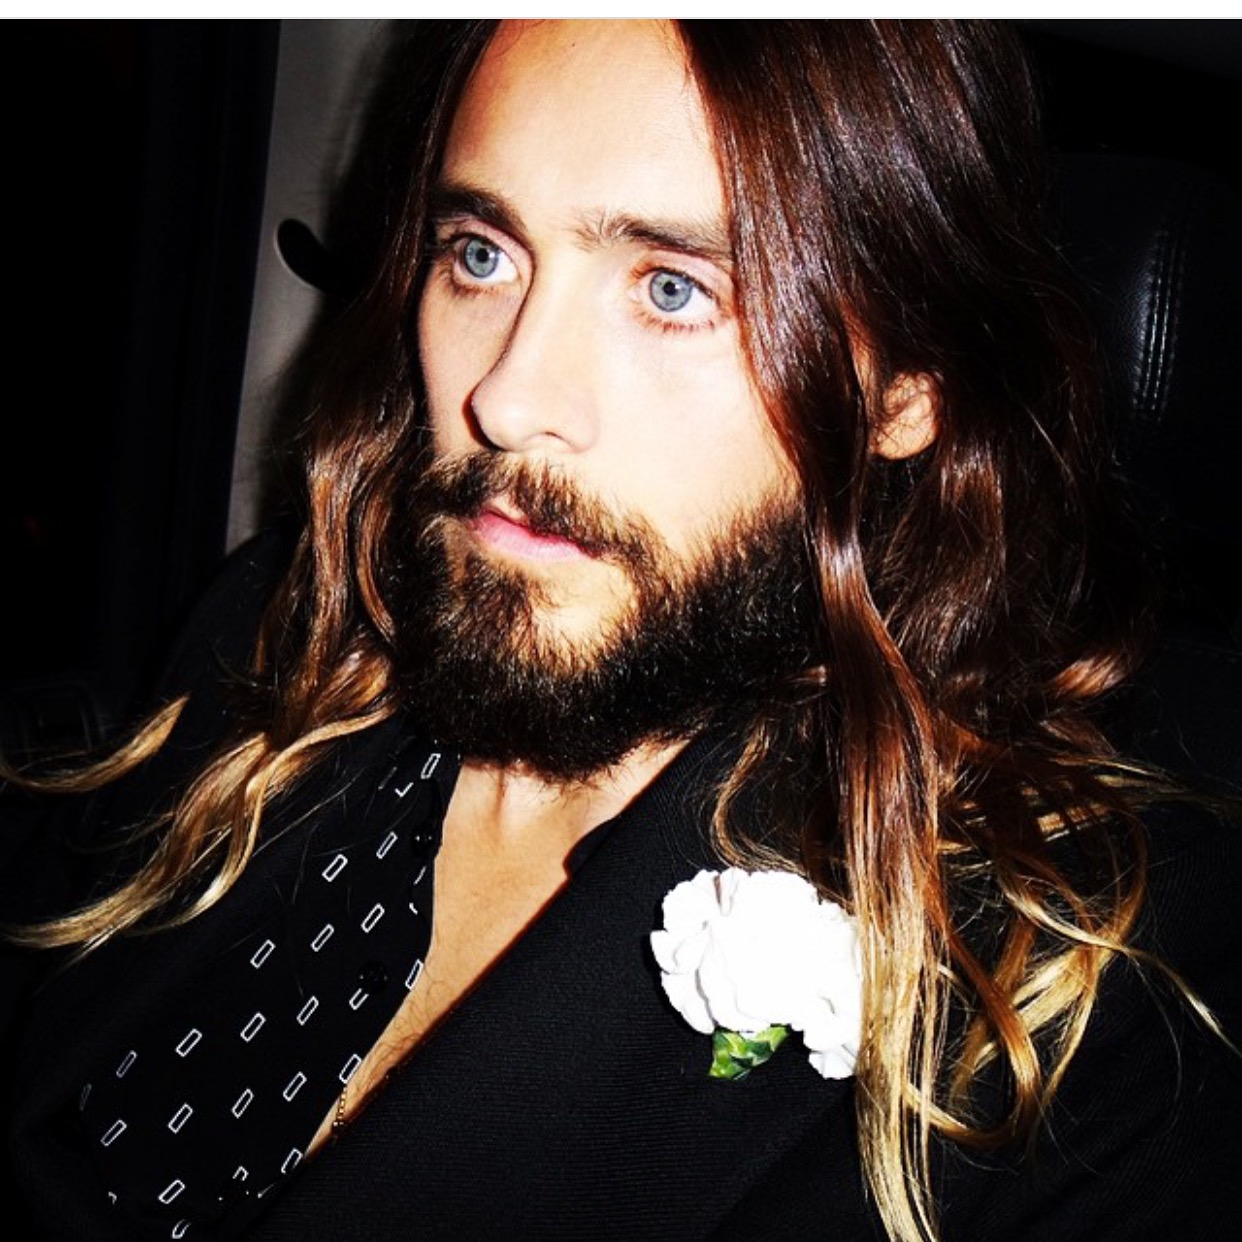 Jared Leto is our distinguished Hottie of the Week